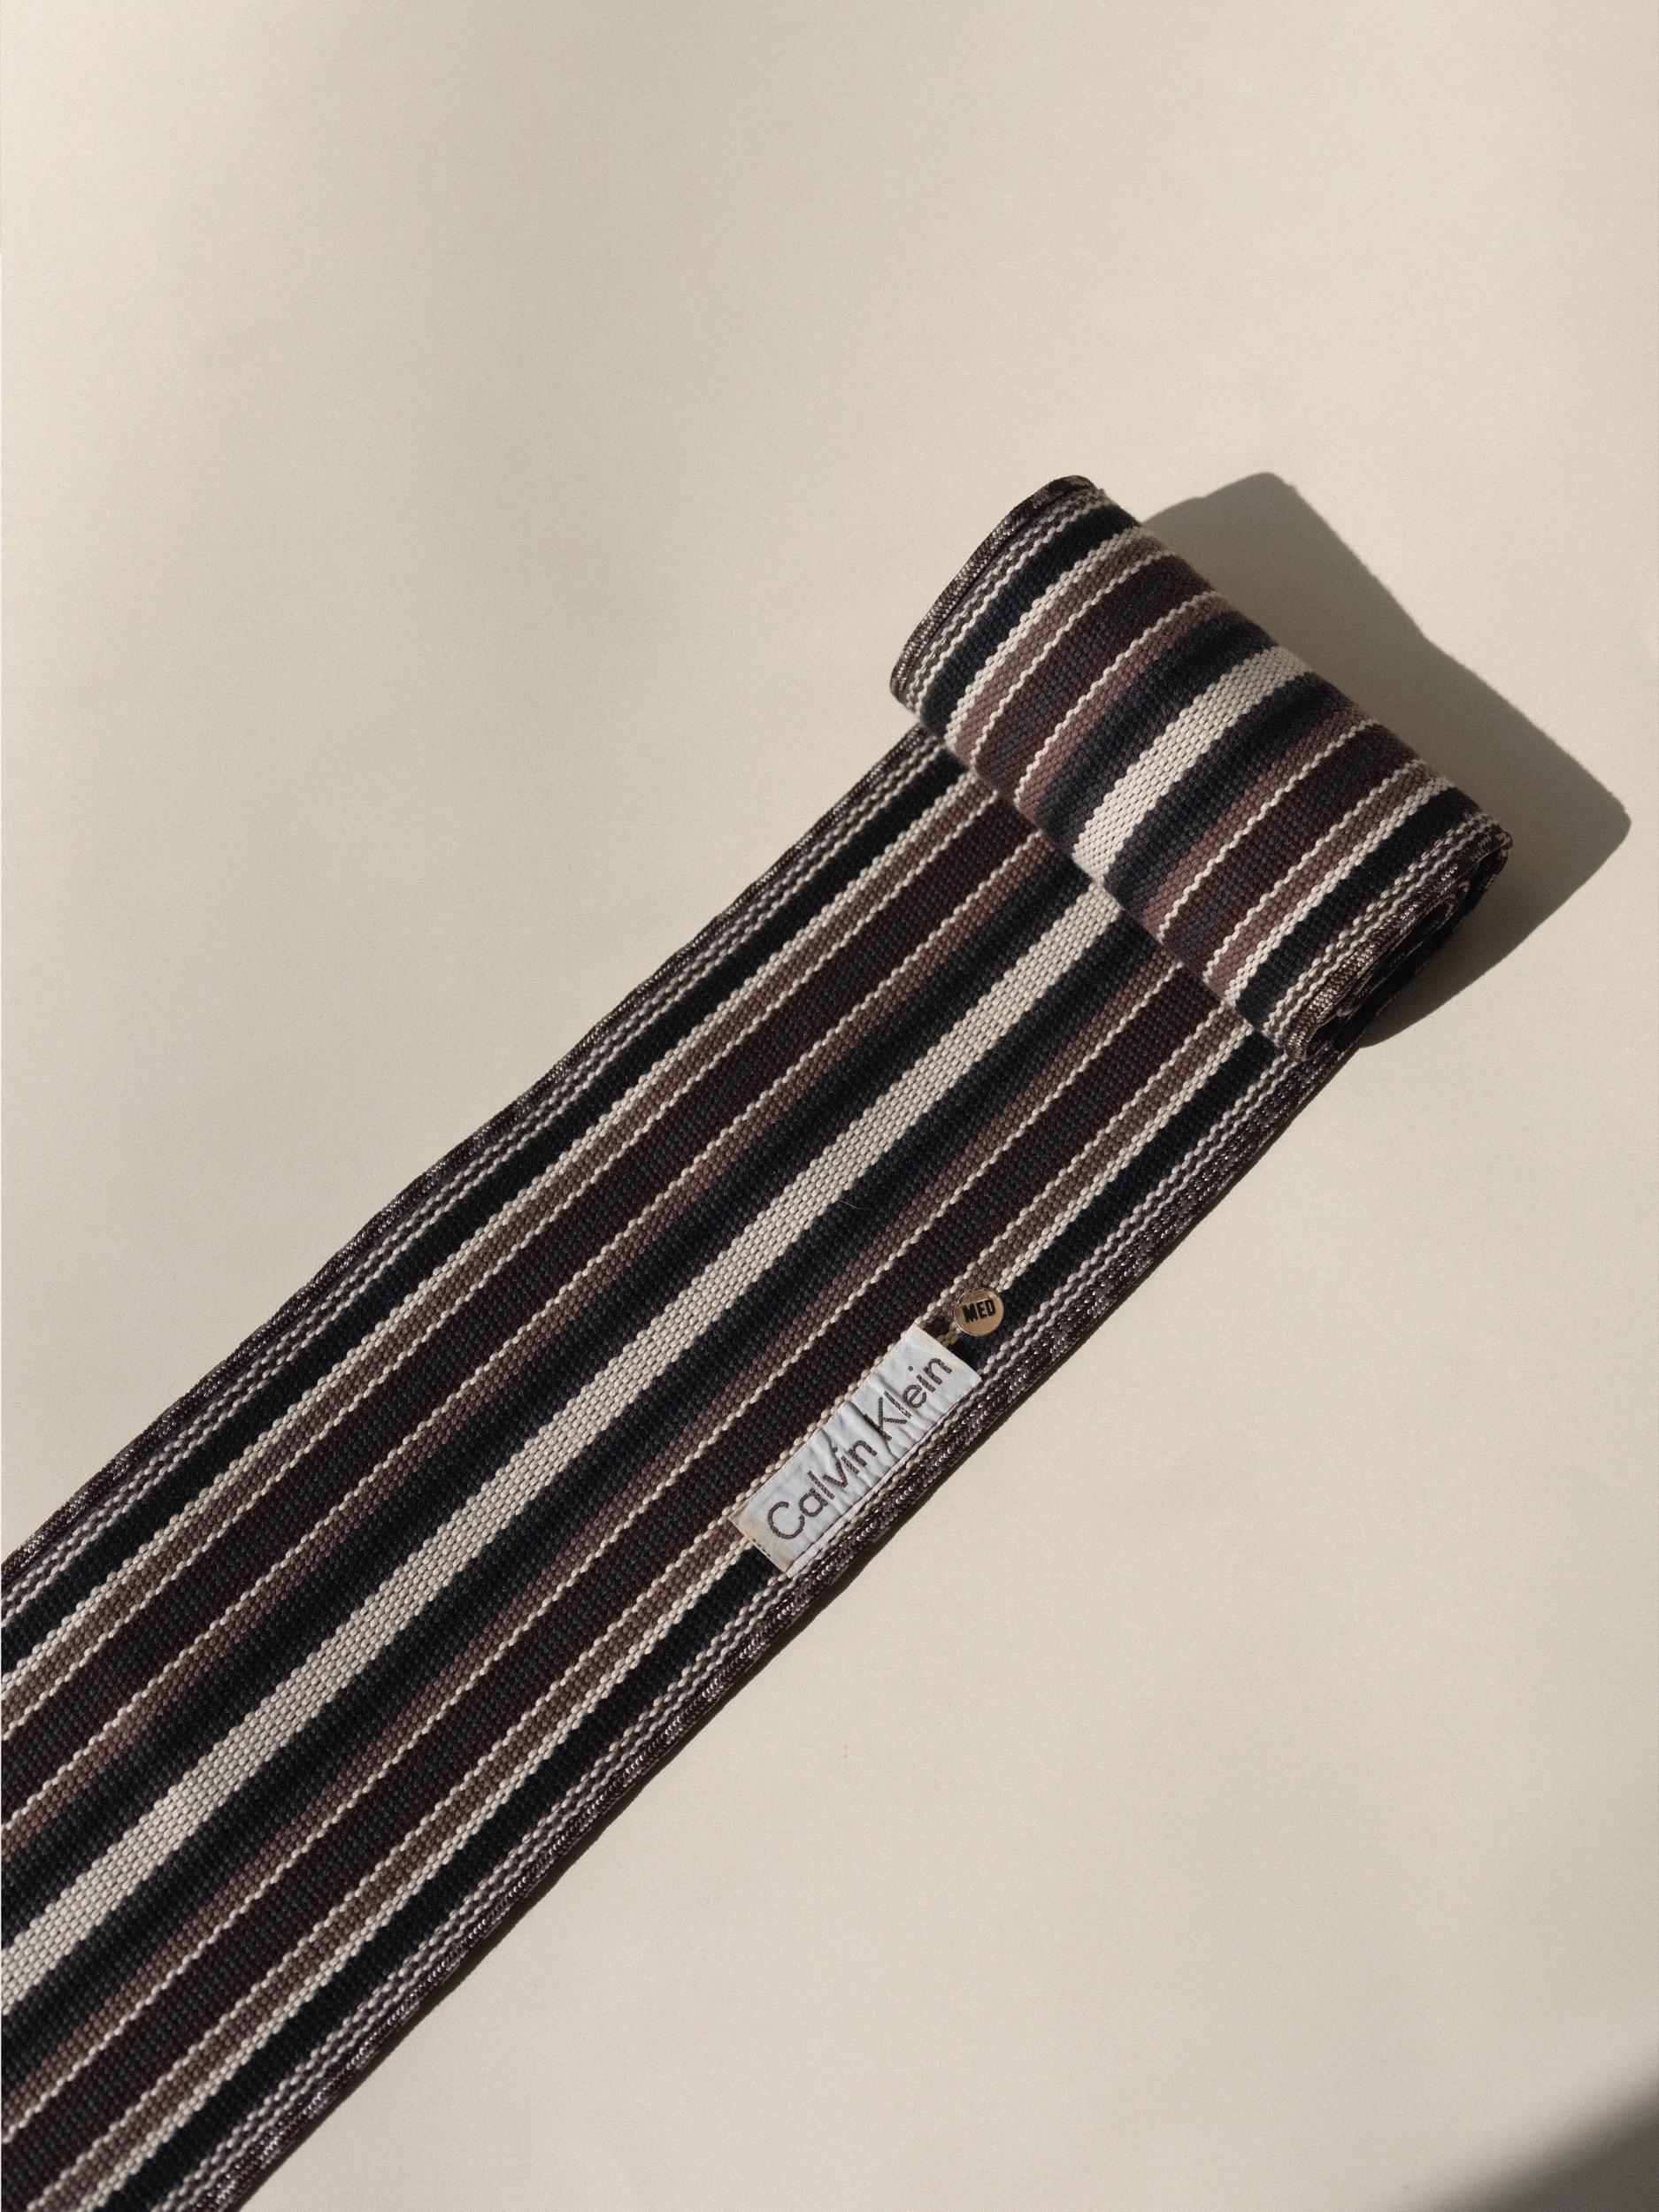 Calvin Klein Spring 1979 Wrap Belt Documented In Good Condition For Sale In Los Angeles, CA